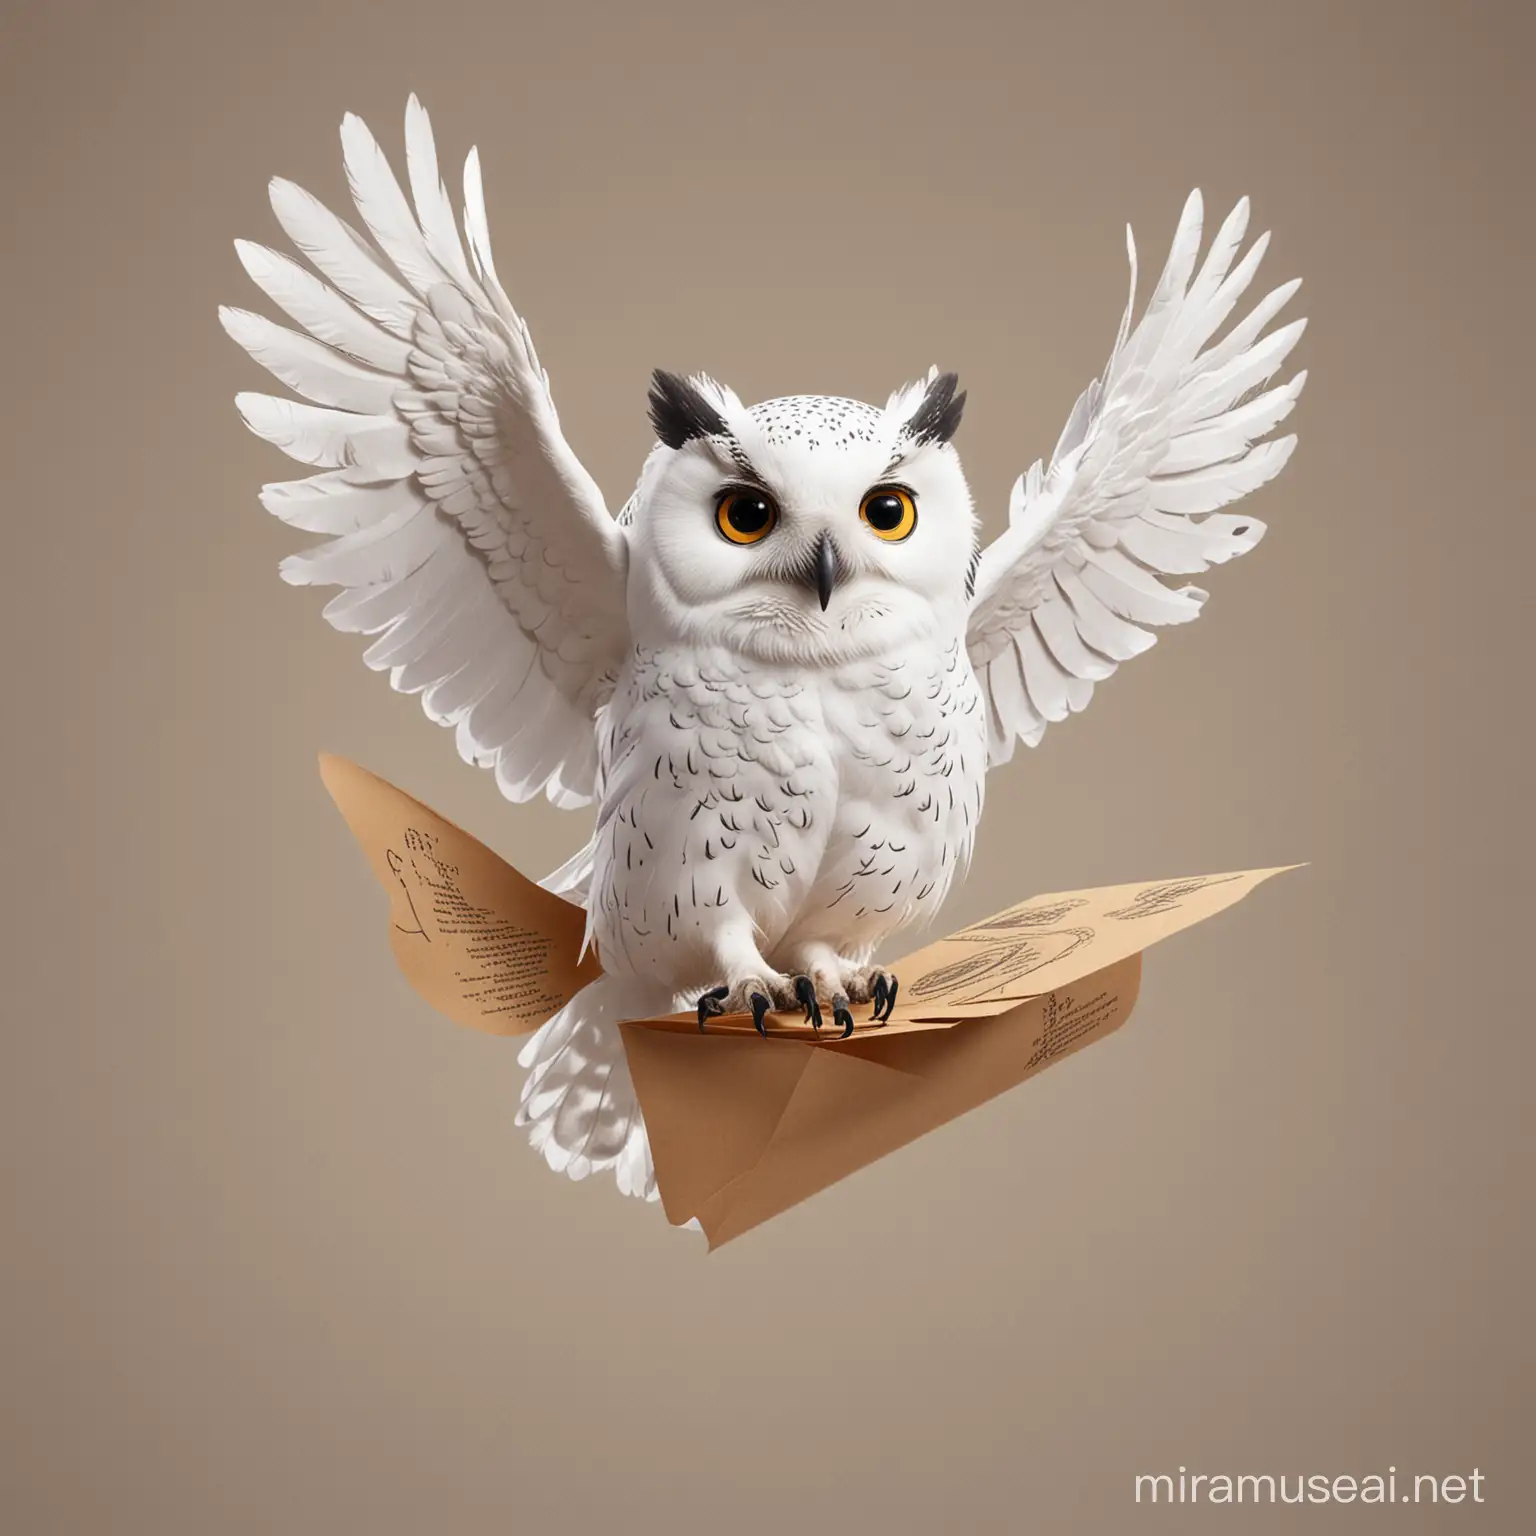 Magical Owl Hedwig Delivery Service Harry Potter Inspired Image